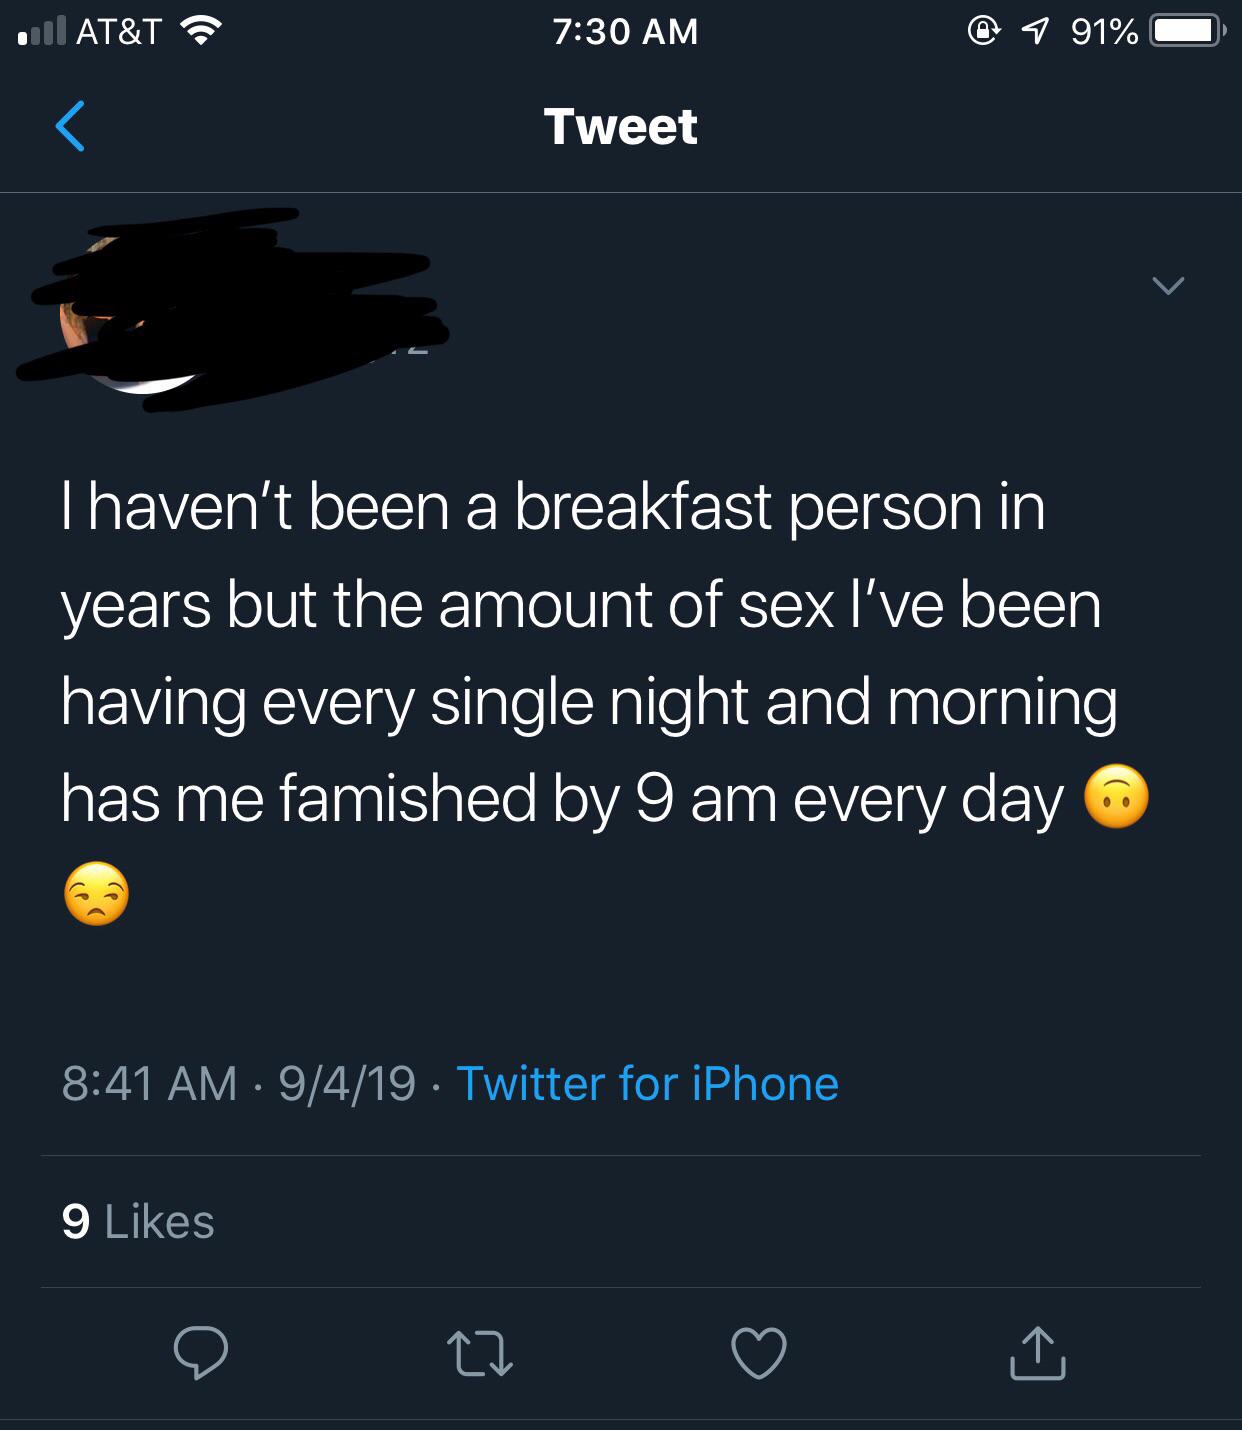 At&T @ 7 91% 0 Tweet Thaven't been a breakfast person in years but the amount of sex I've been having every single night and morning has me famished by 9 am every day 9419. Twitter for iPhone 9